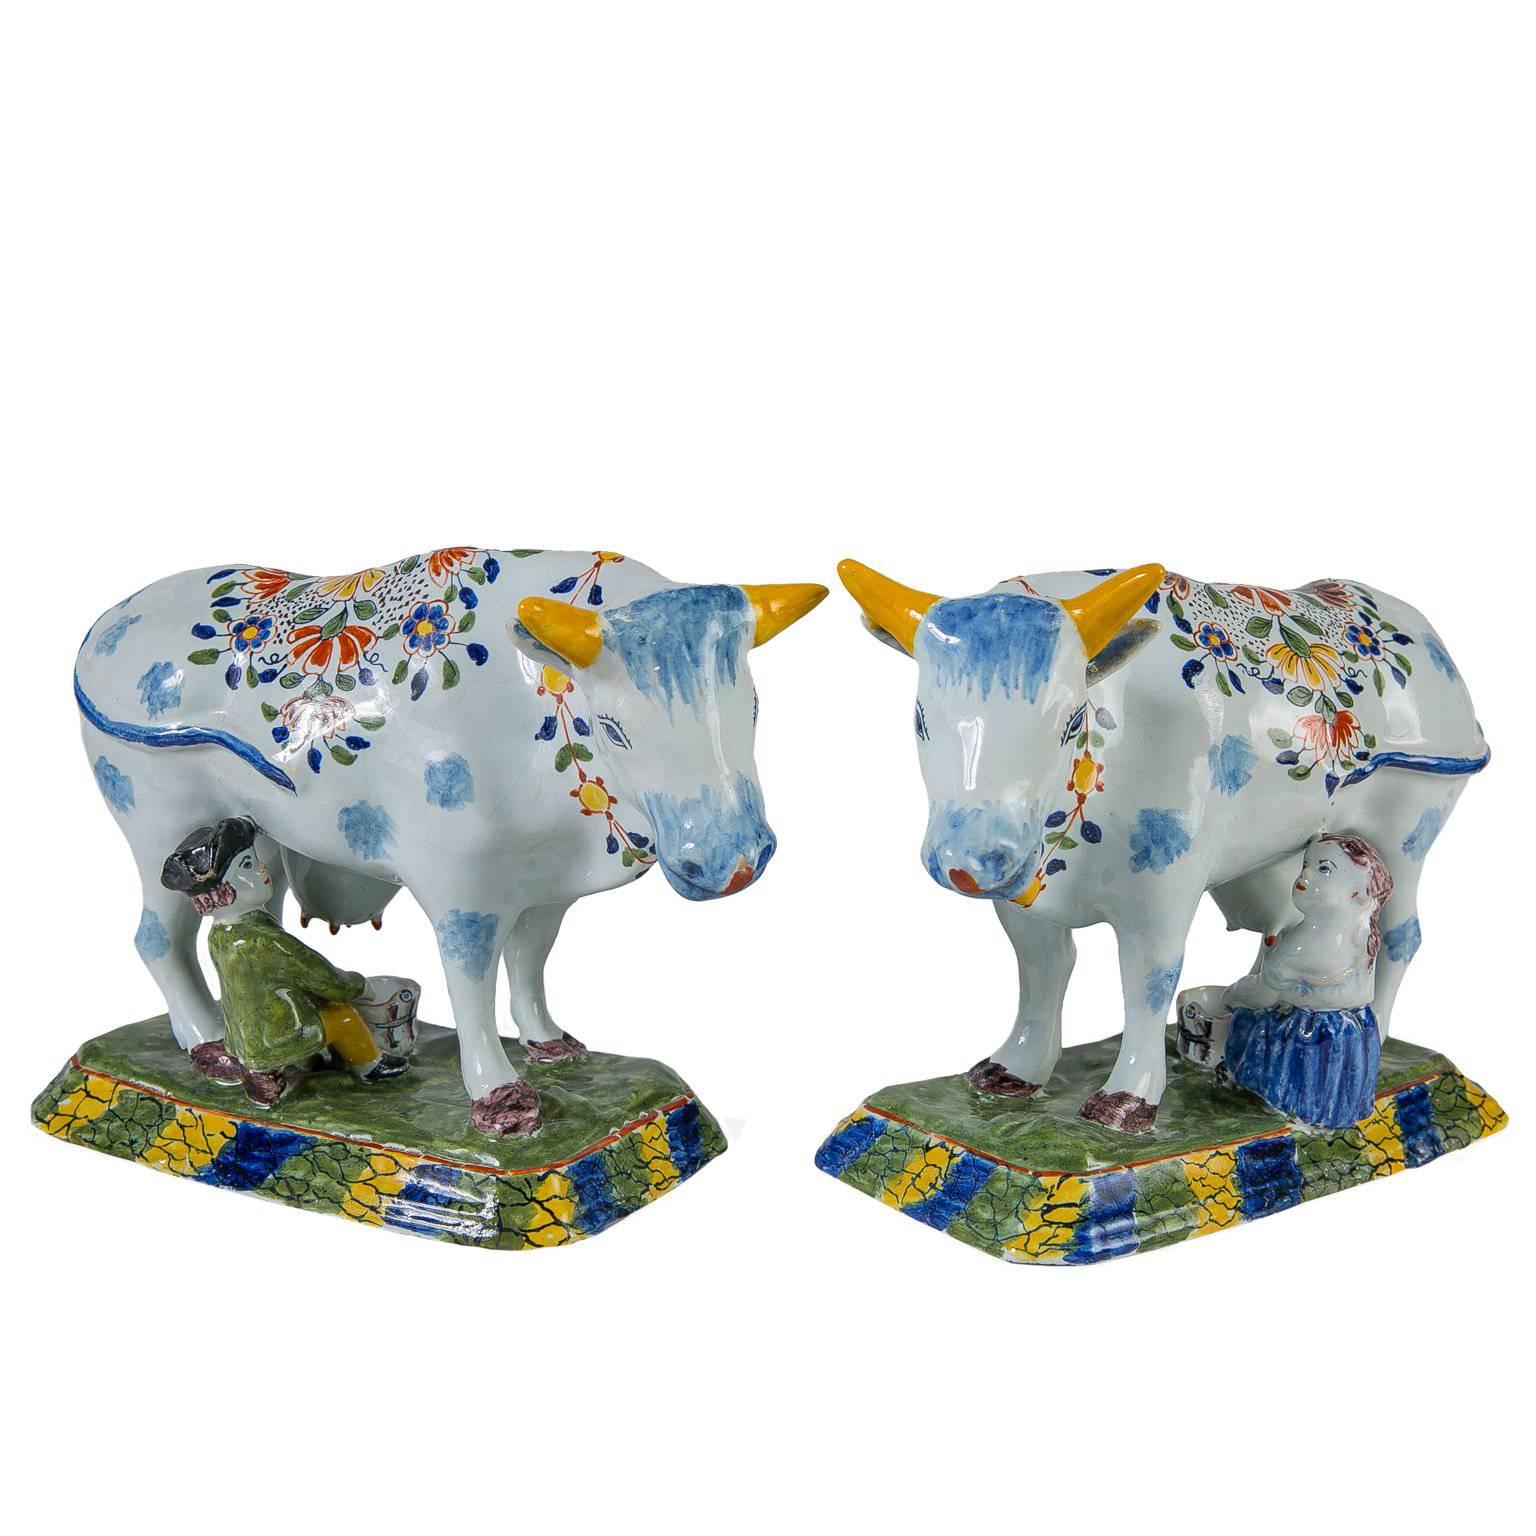 Pair of Dutch Delft Cows Painted in Bright Polychrome Colors